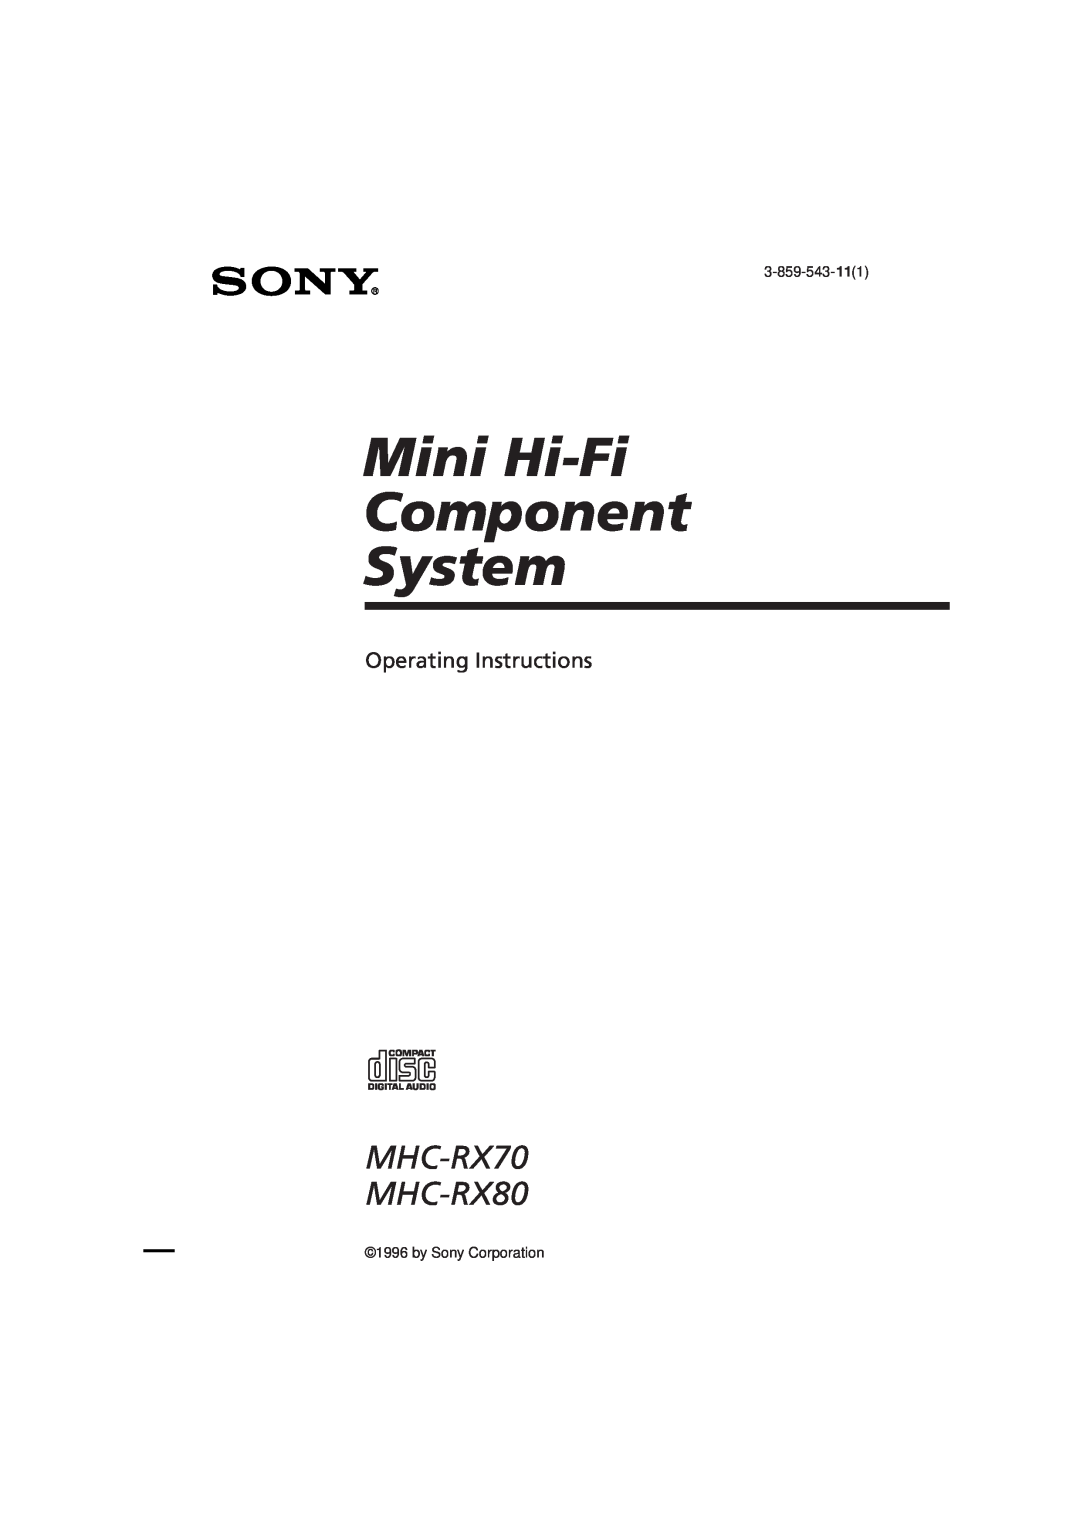 Sony manual 3-859-543-111, by Sony Corporation, Mini Hi-Fi Component System, MHC-RX70 MHC-RX80, Operating Instructions 